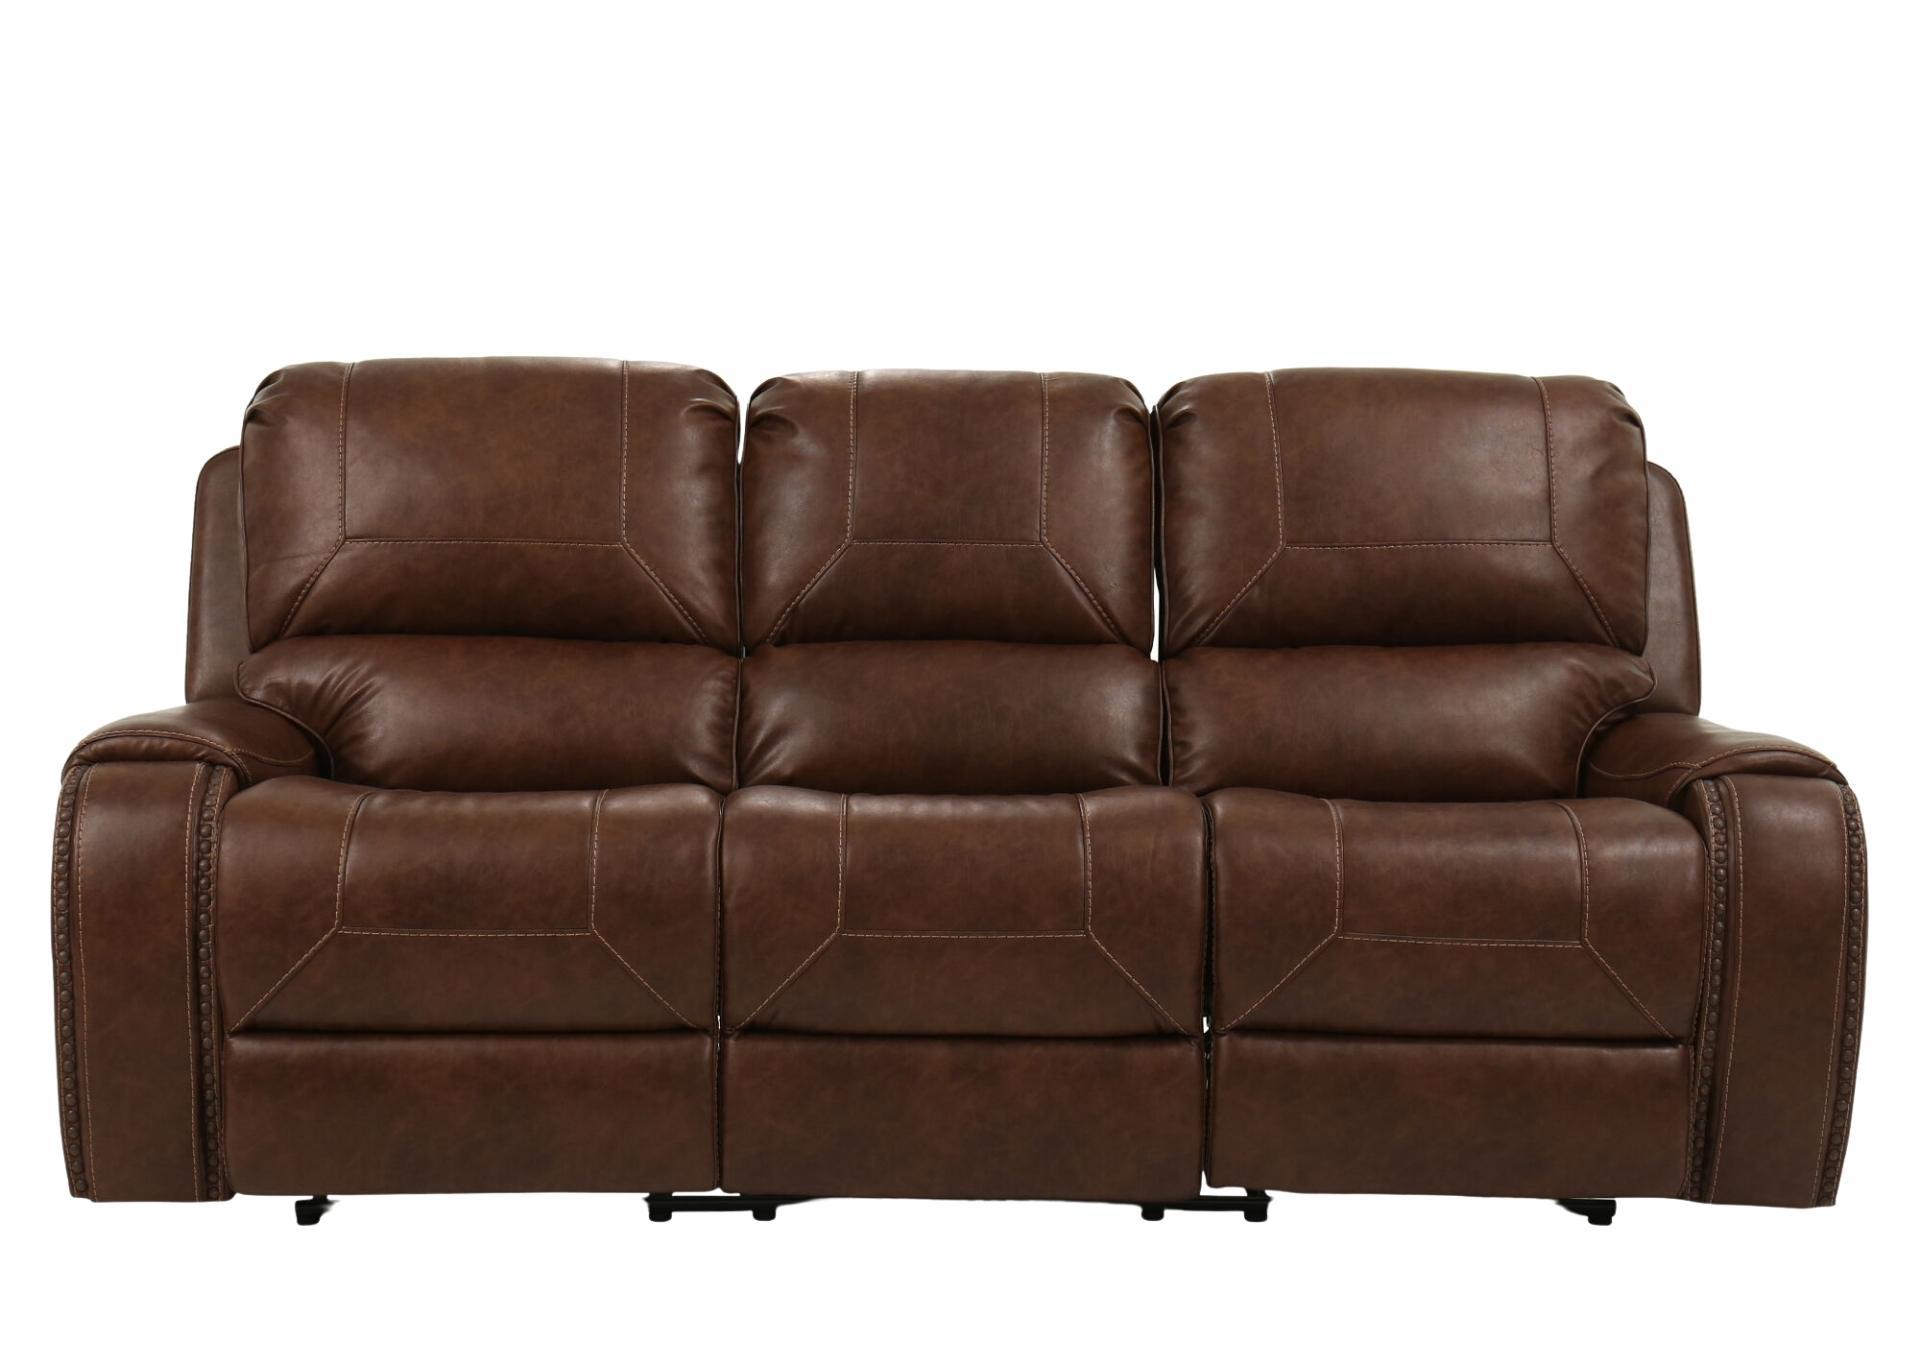 KEILY BROWN RECLINING SOFA WITH DROP DOWN TABLE,STEVE SILVER COMPANY